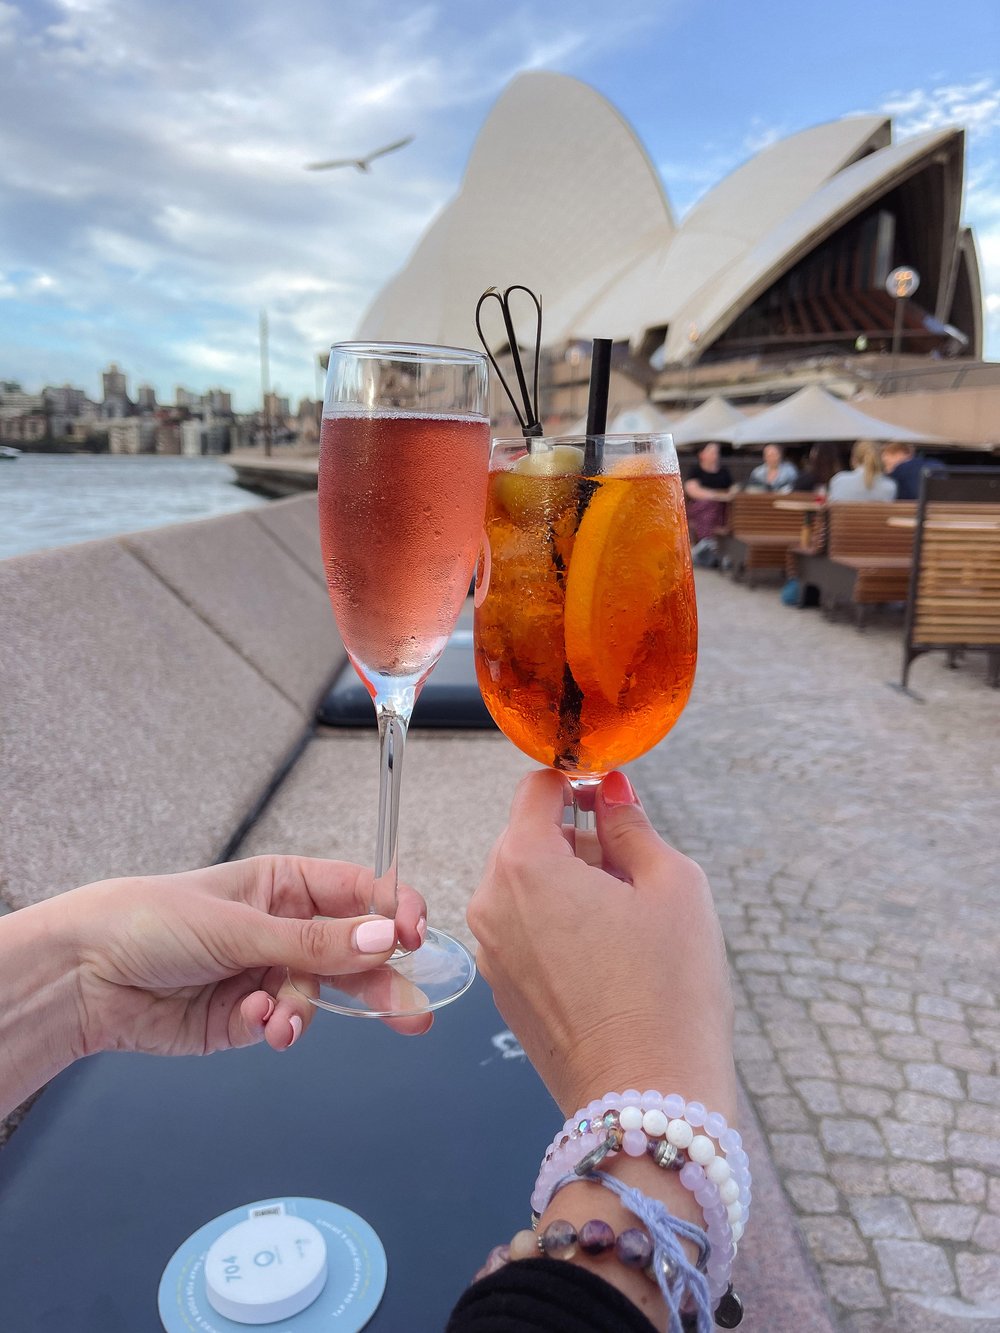 Cocktails at the Opera Bar - Sydney - New South Wales (NSW) - Australia